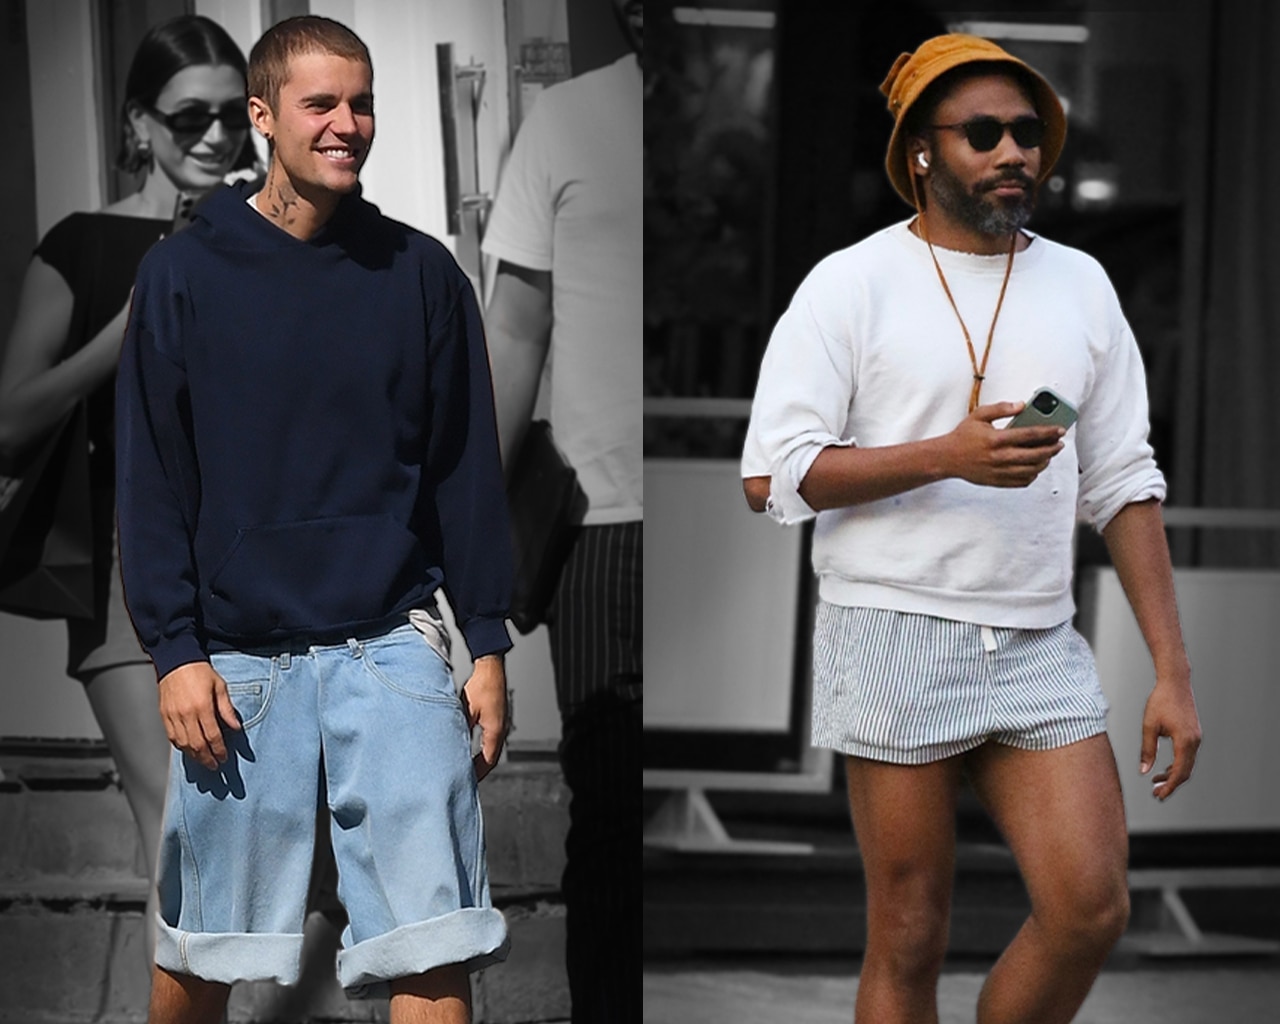 Fashion: Shorts And Long-Sleeve Sweats Are An Underrated Power